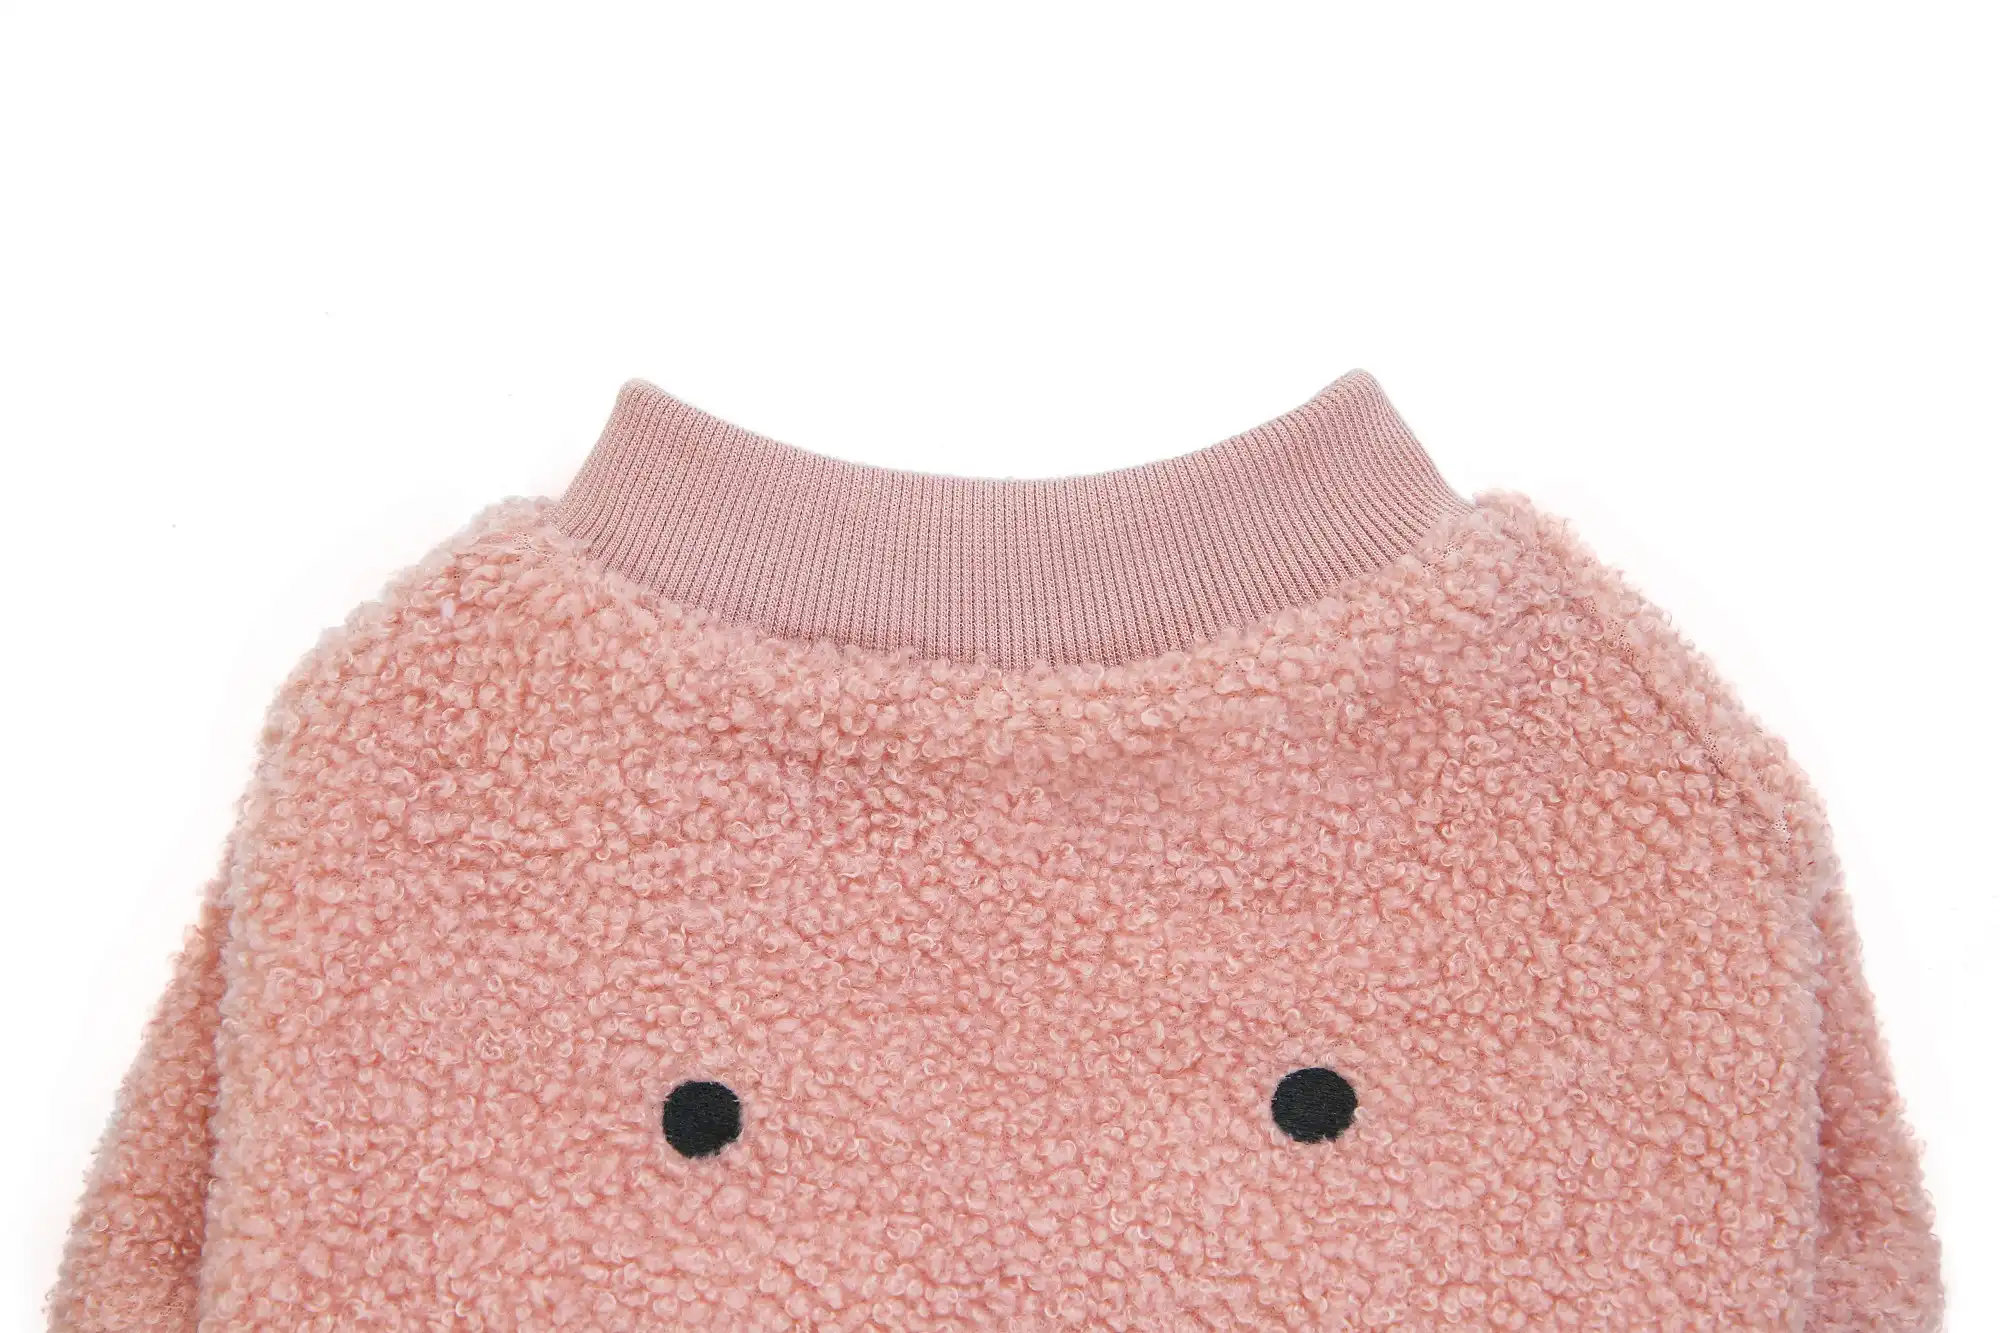 Hamster Embroidered Sweater for Dogs - Details